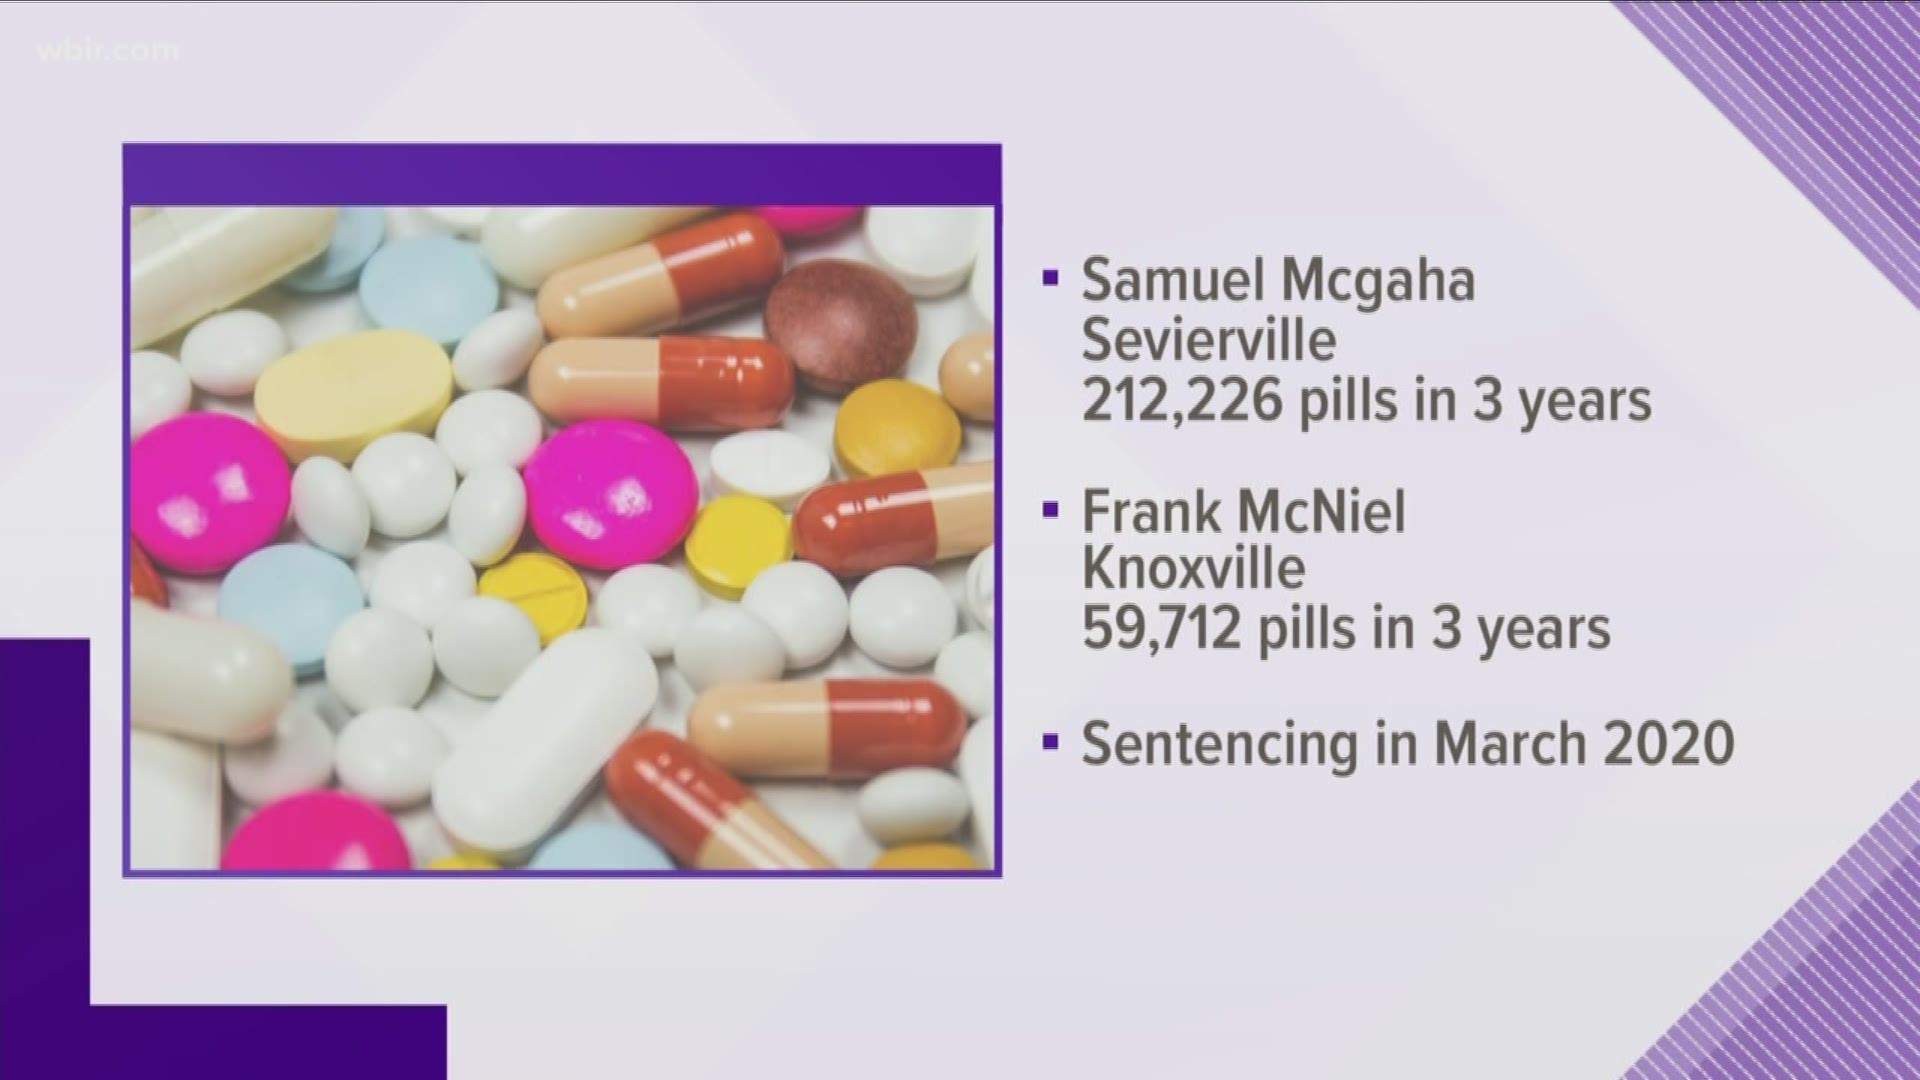 Two East Tennessee doctors pleaded guilty to federal opioid offenses.